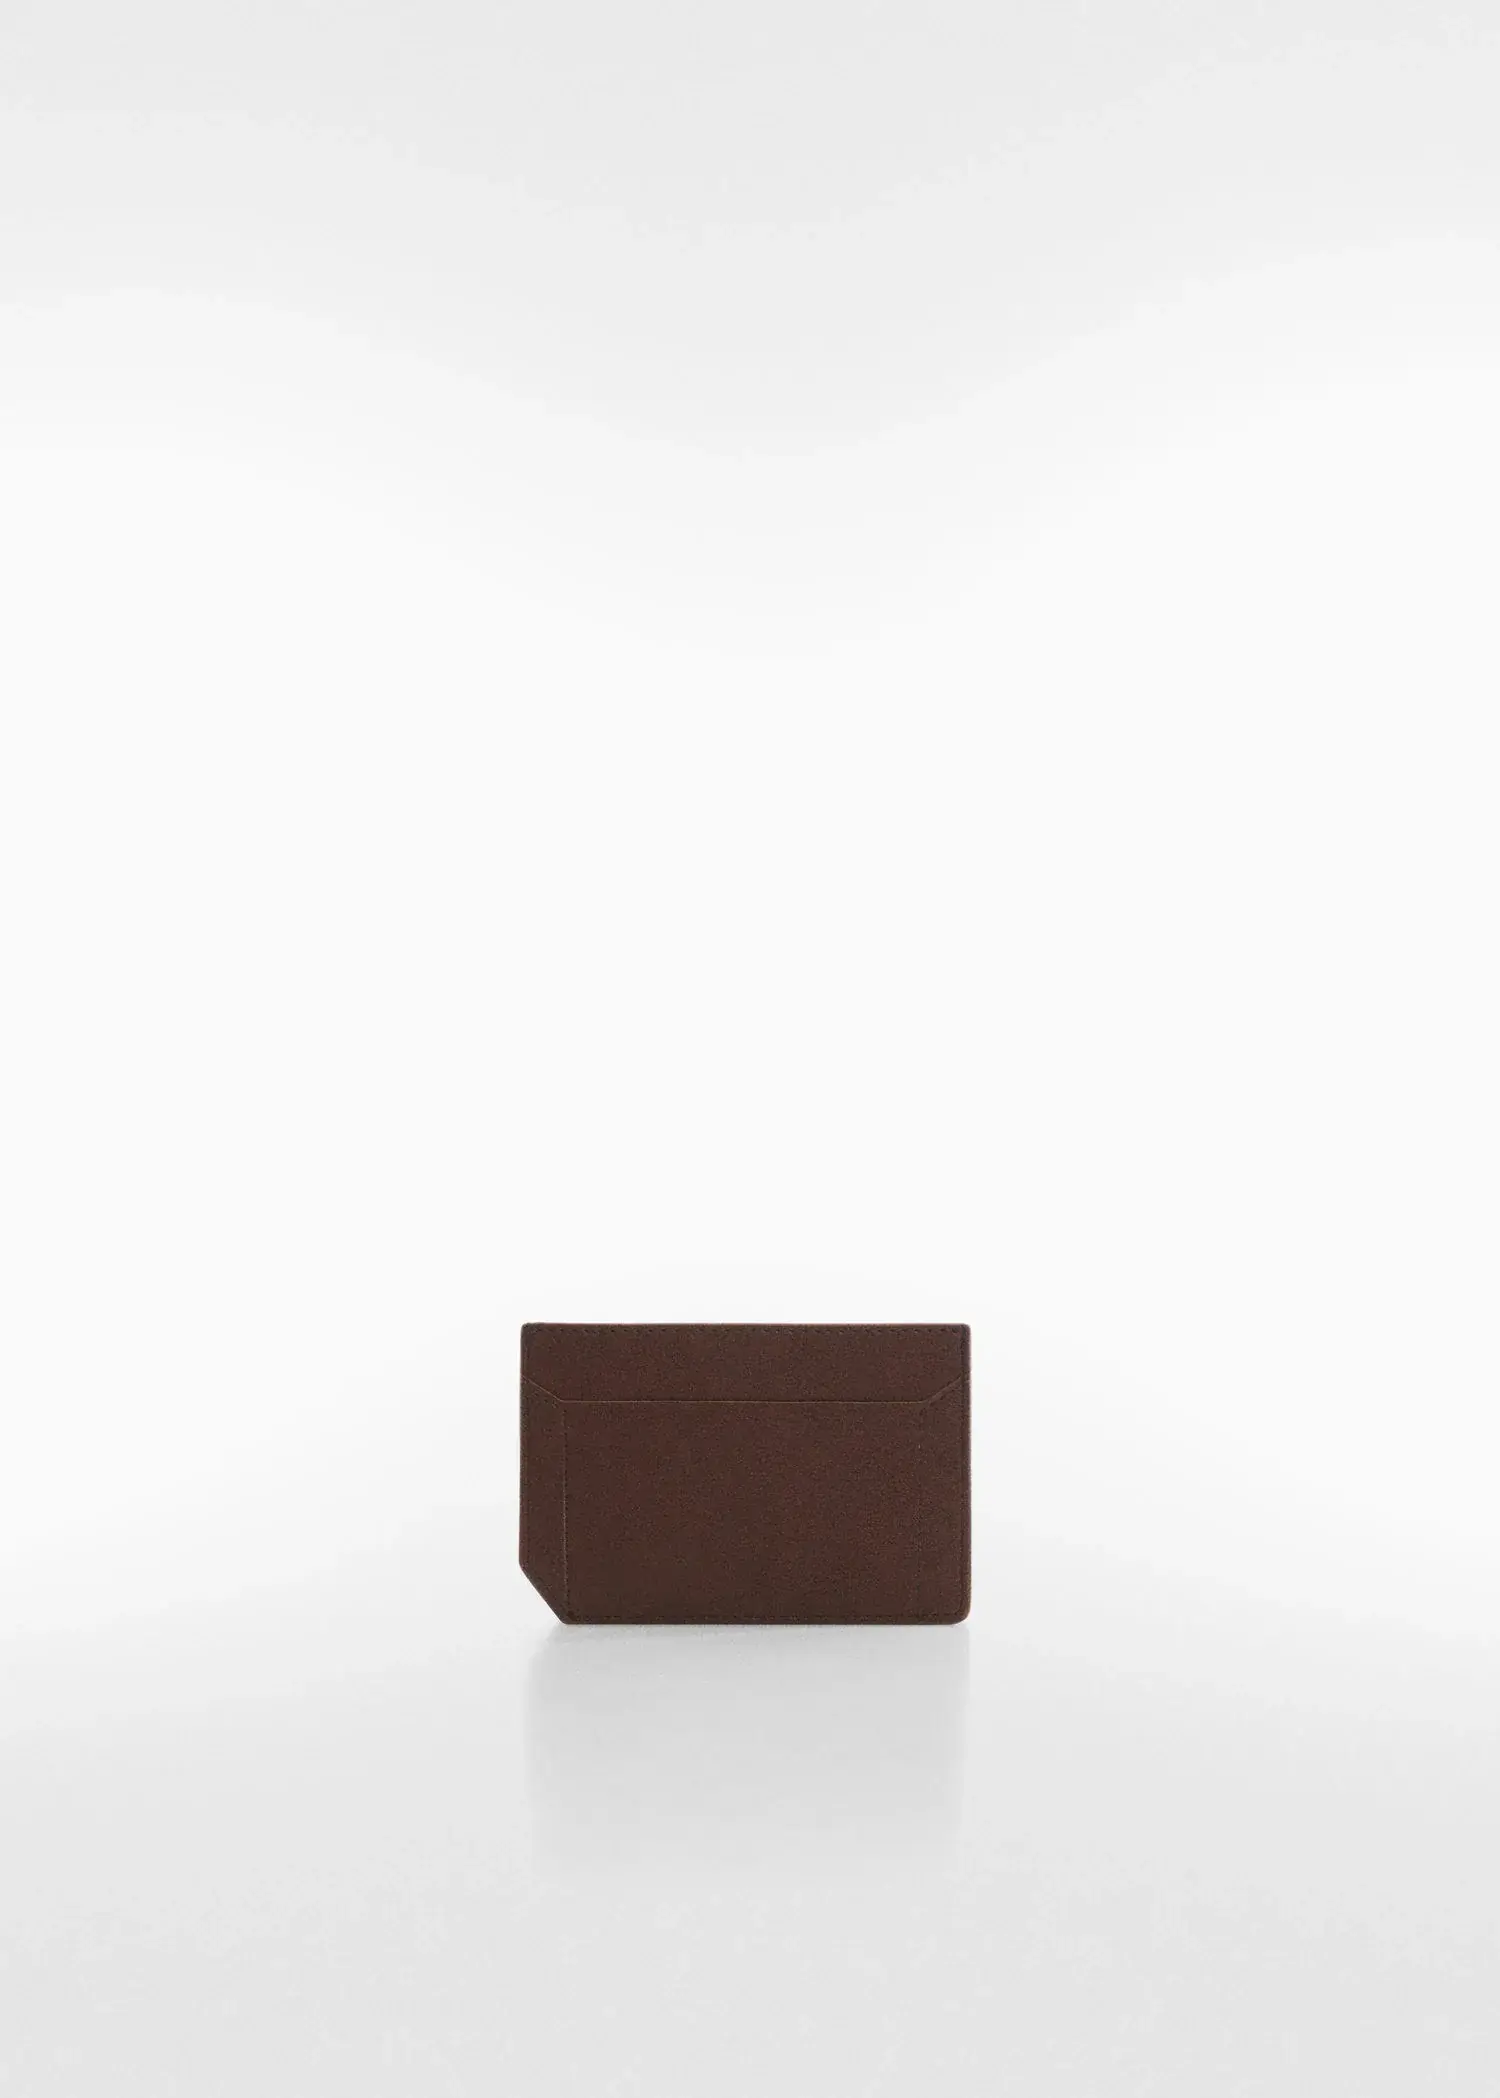 Mango Anti-contactless leather-effect card holder. a piece of brown leather sitting on top of a table. 